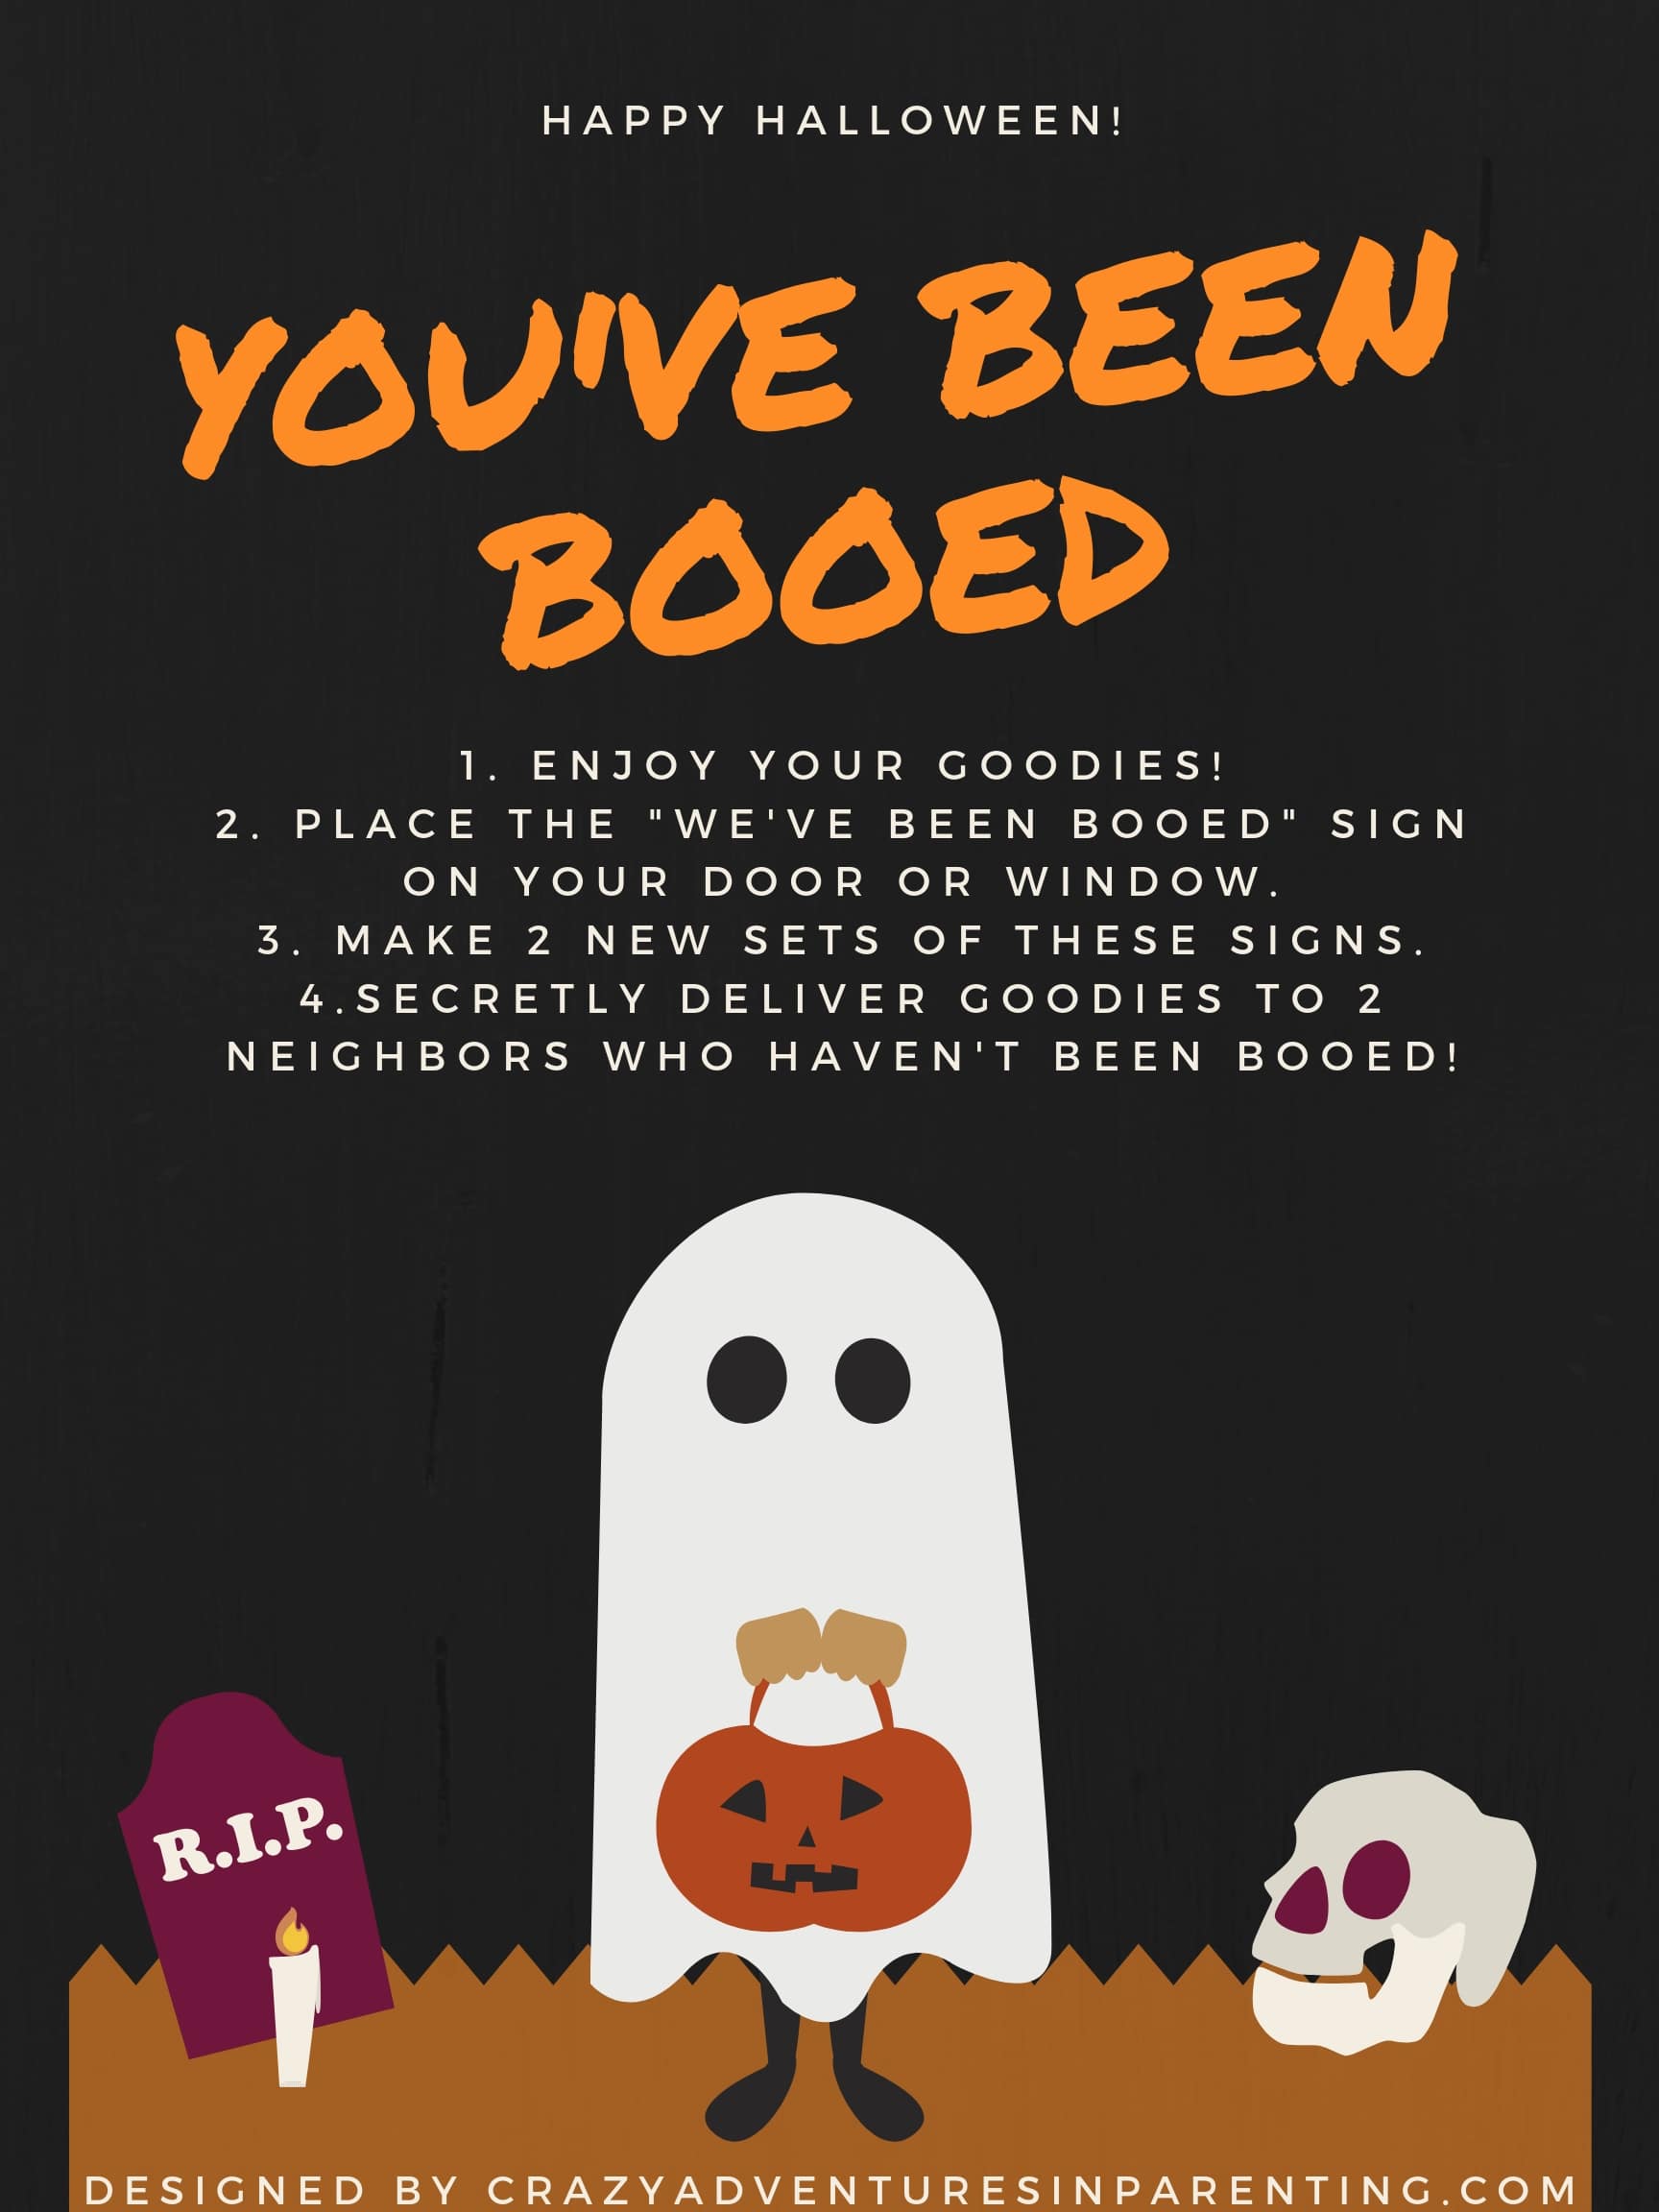 4 FREE Printable You've Been BOOed Signs Crazy Adventures in Parenting